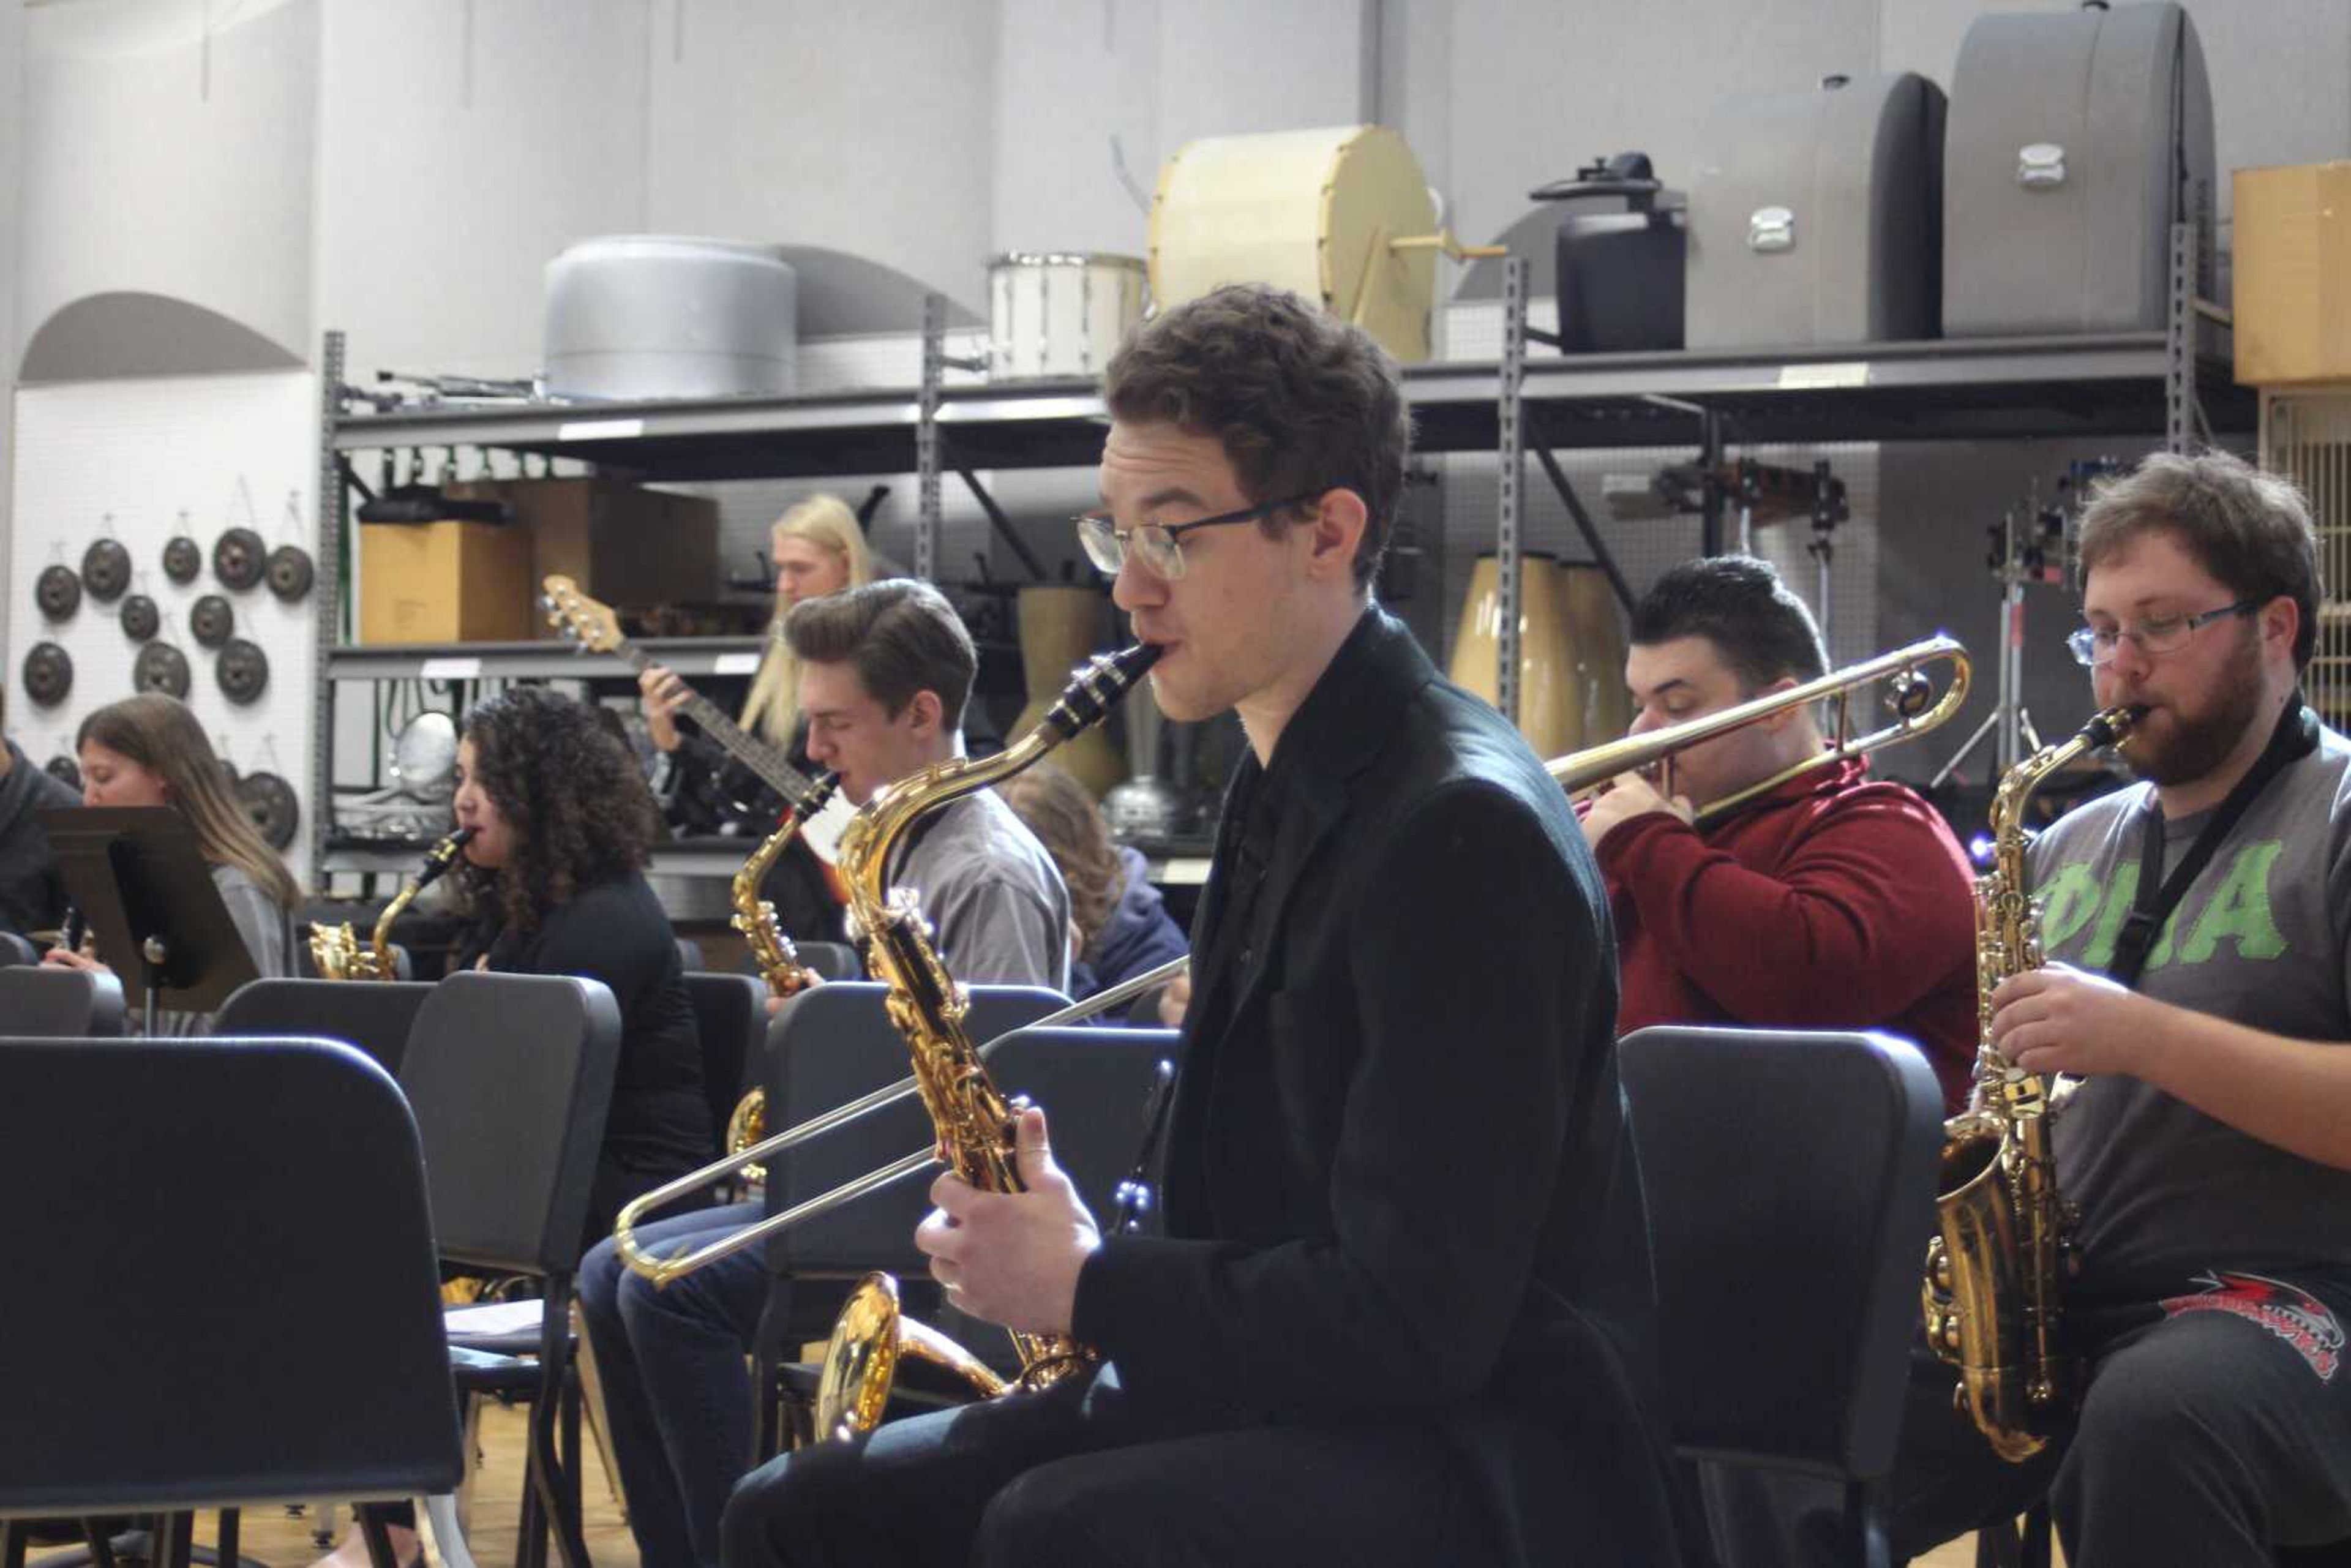 Southeast students learn from a guest musician during a clinic at the 20th annual Clark Terry Jazz Festival presented by Phi Mu Alpha last year.